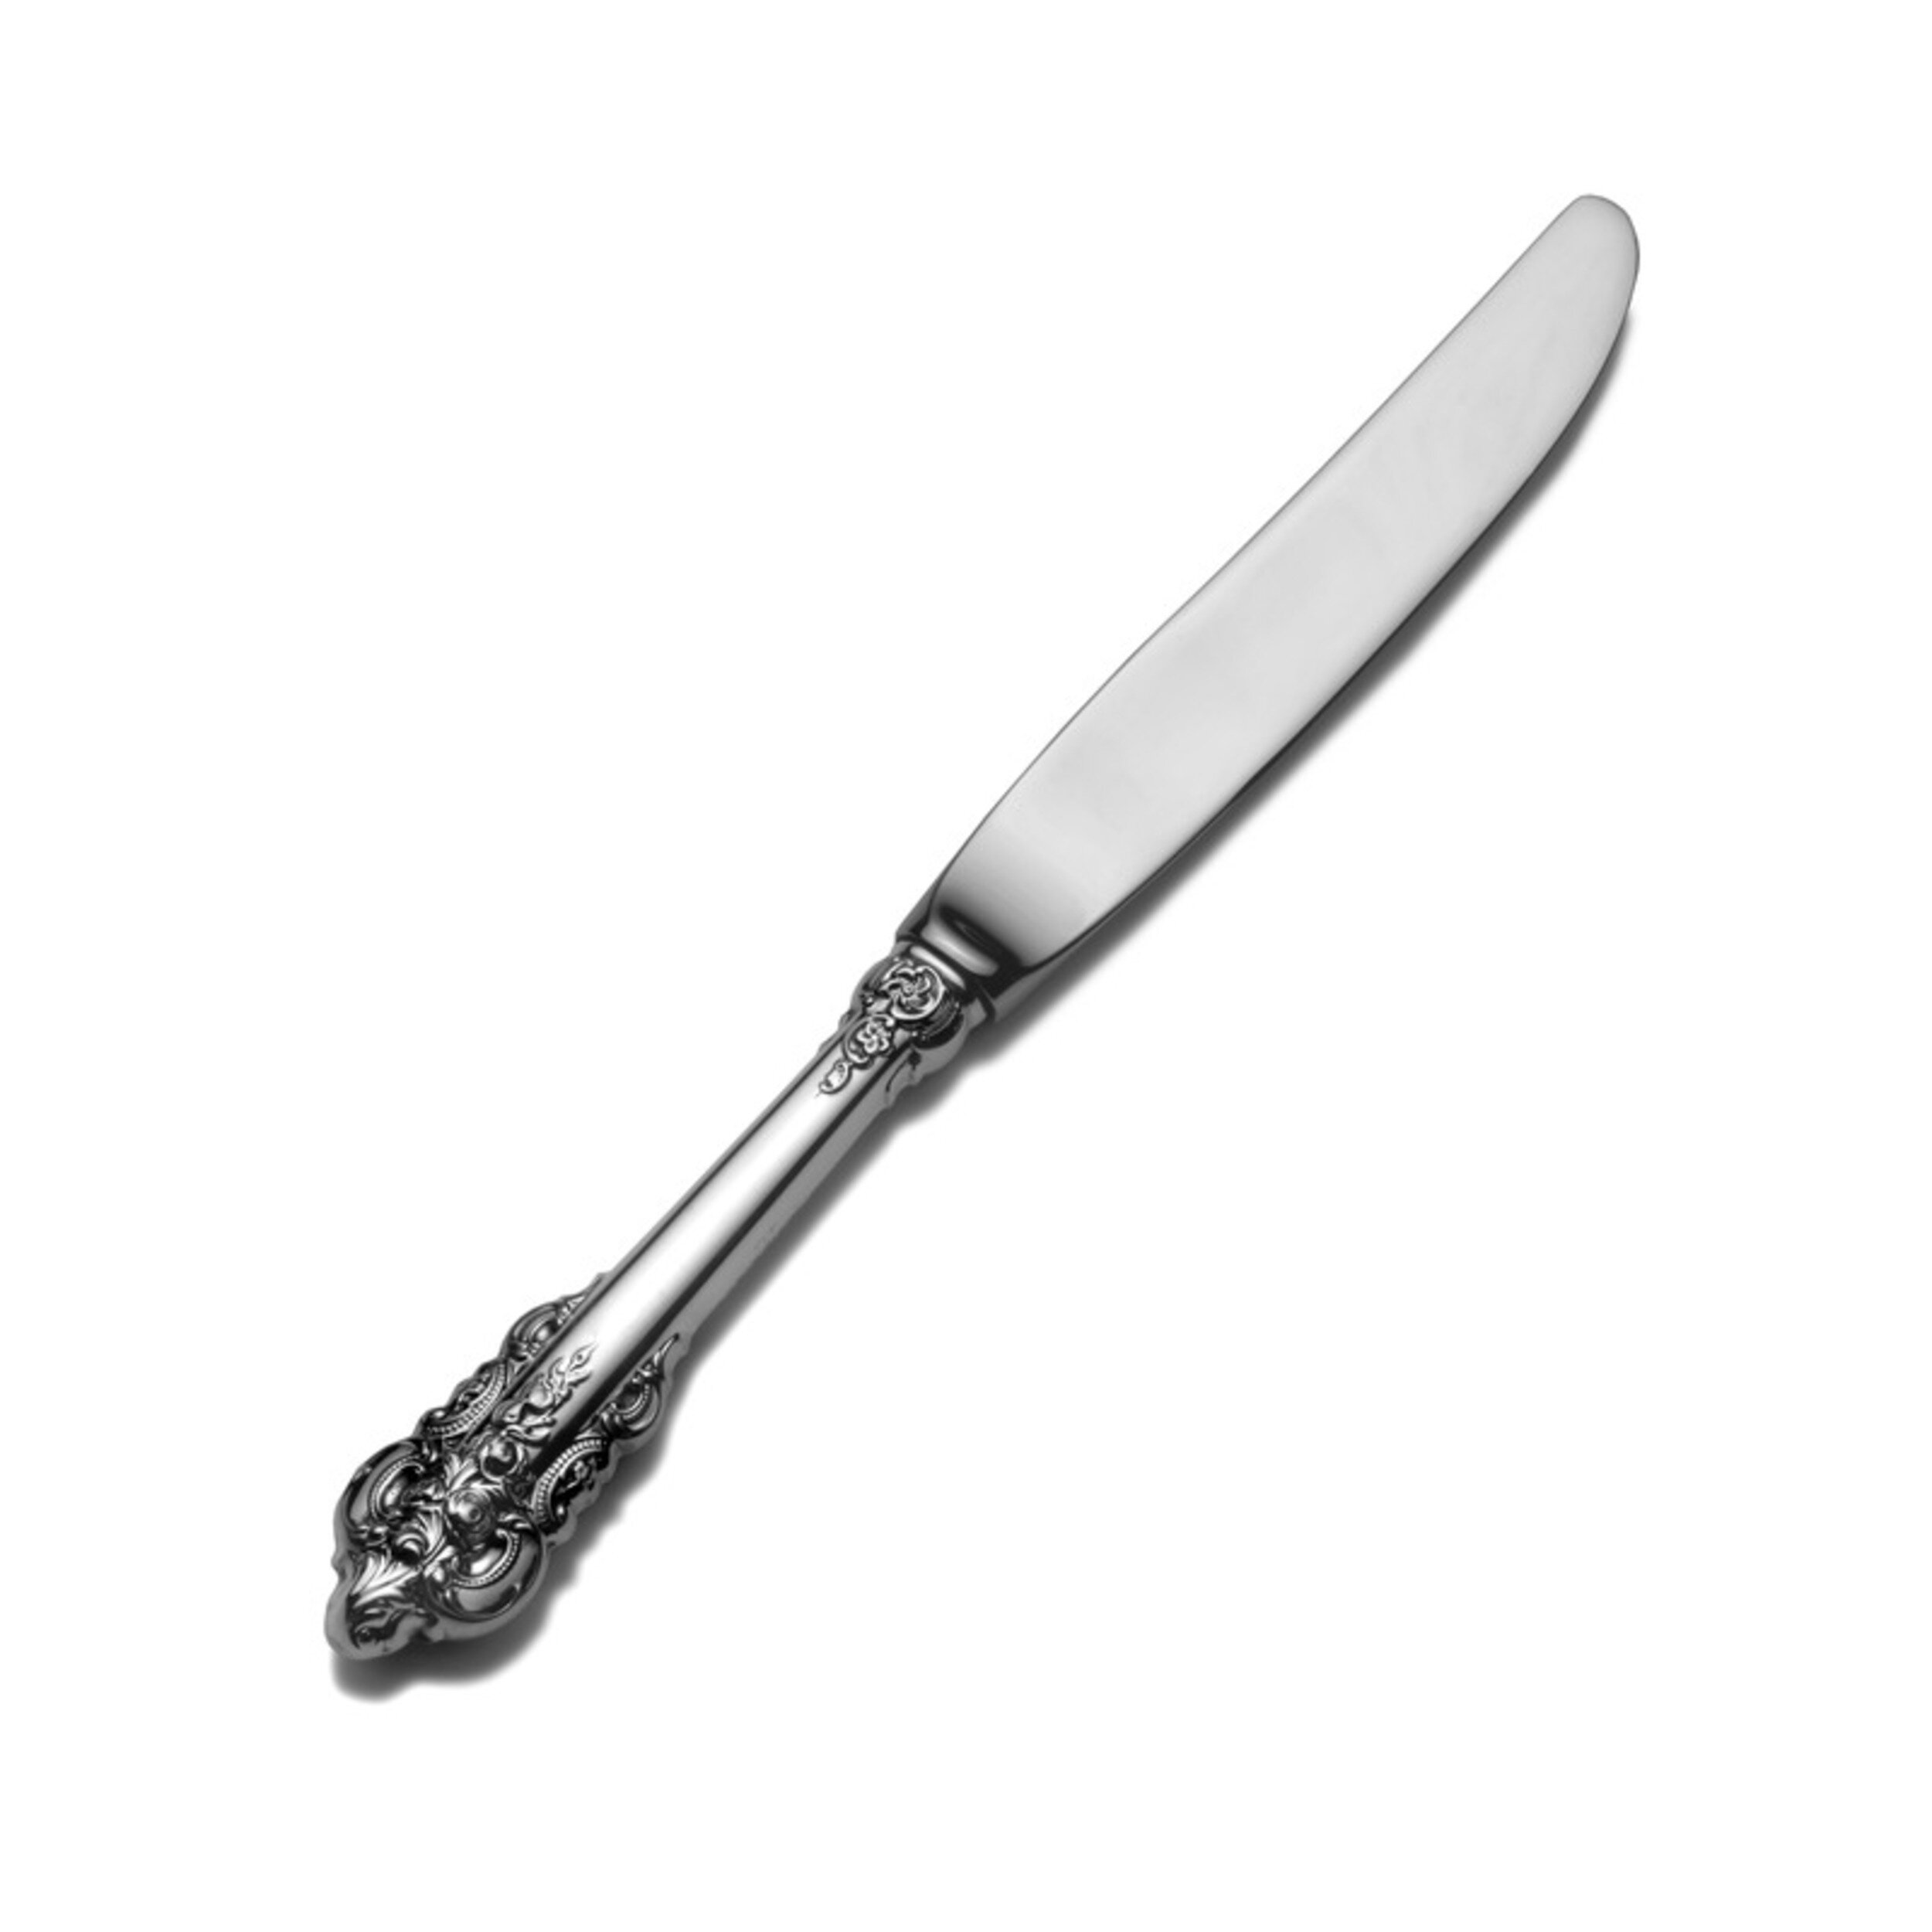 Wallace Grande Baroque Child Knife with Hollow Handle | Wayfair